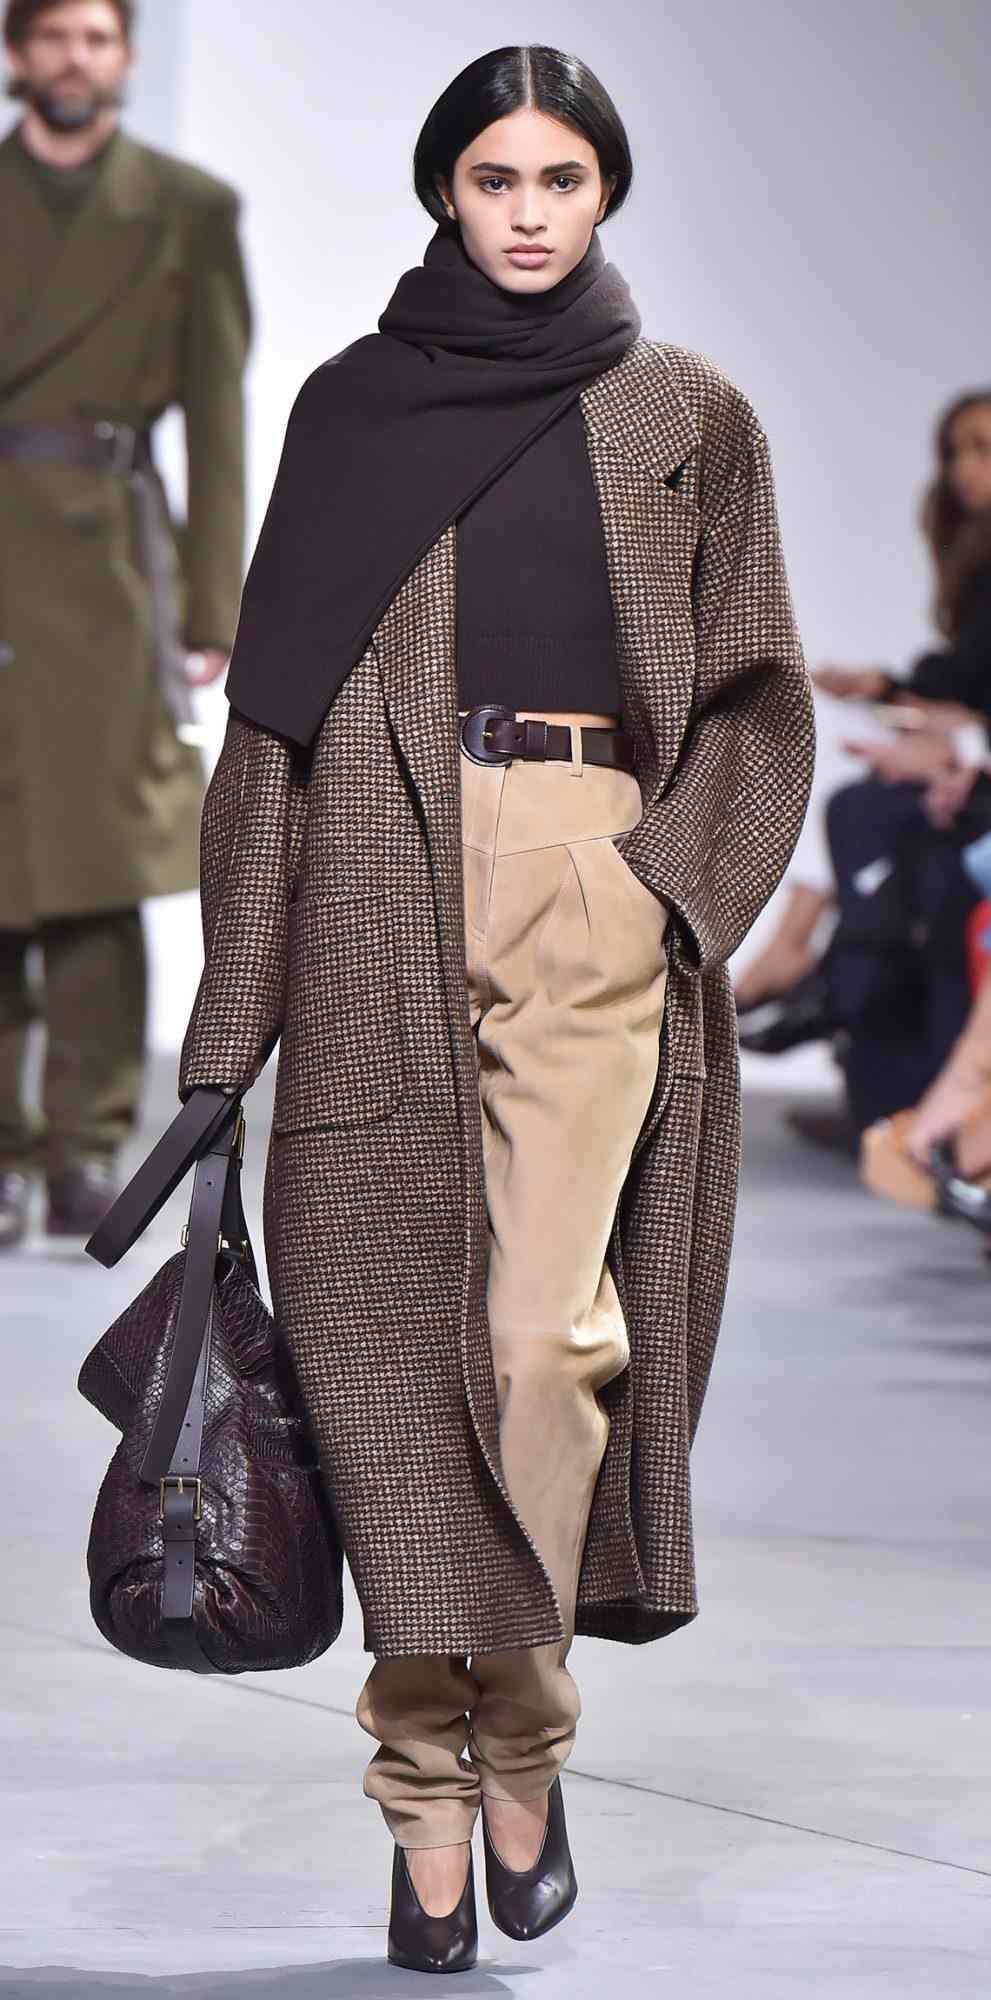 MICHAEL KORS COLLECTION READY-TO-WEAR FALL 2017